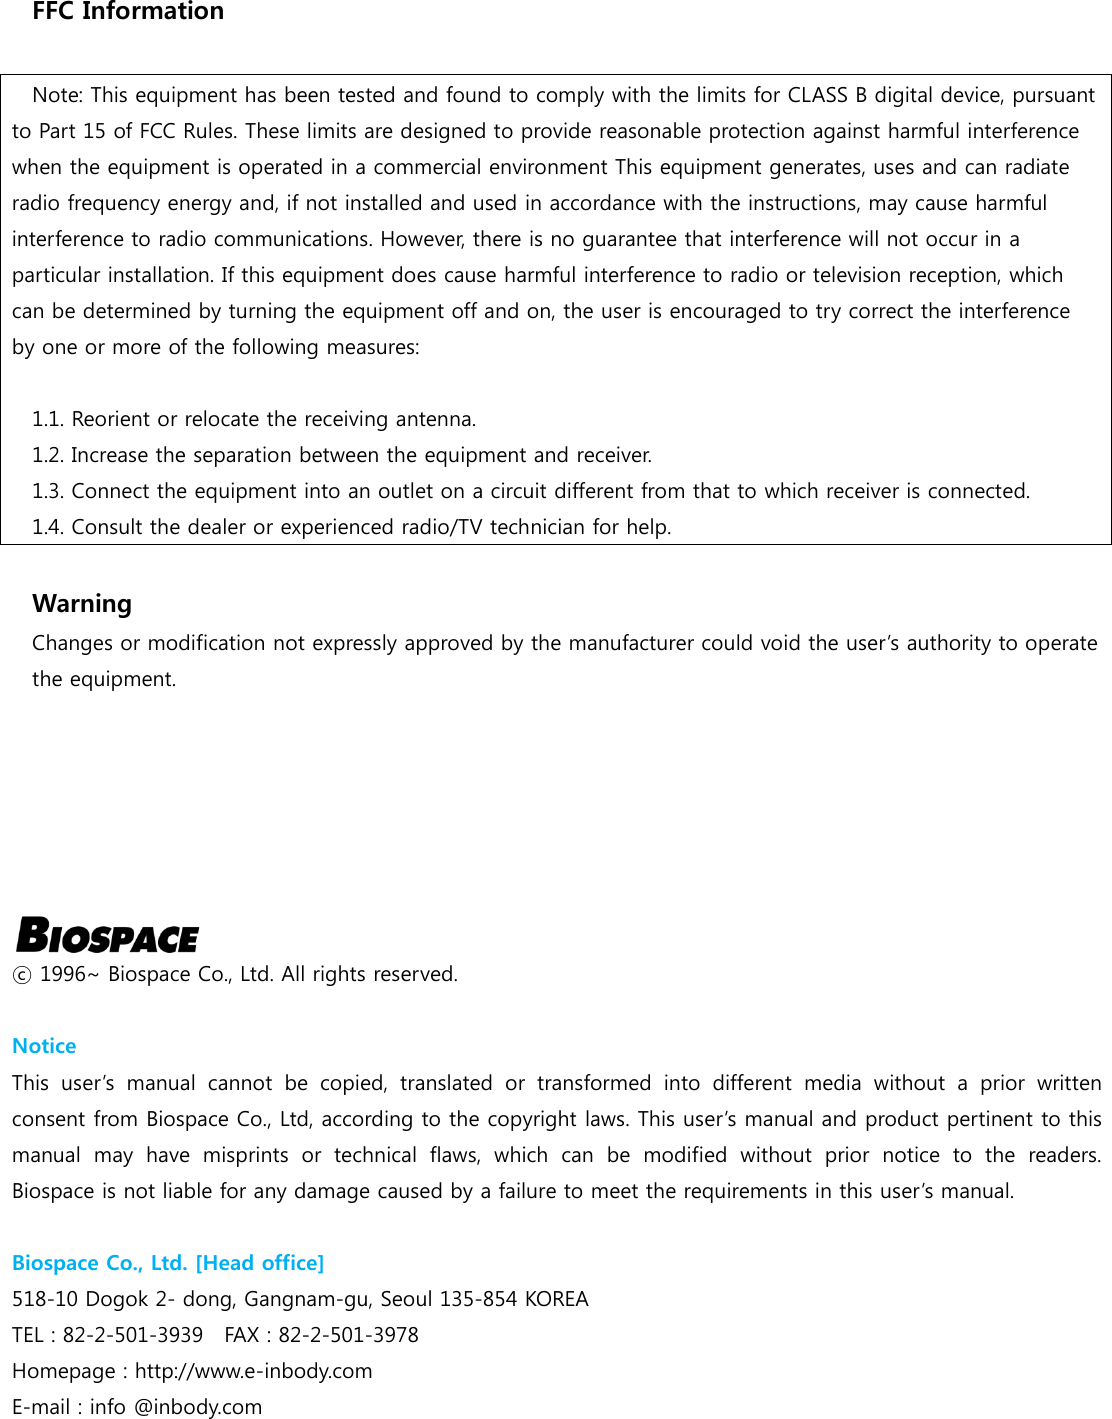 Page 6 of InBody BS-RFIDREADER Low Power Communication Device User Manual  RFID Reader                  120330 REV2 